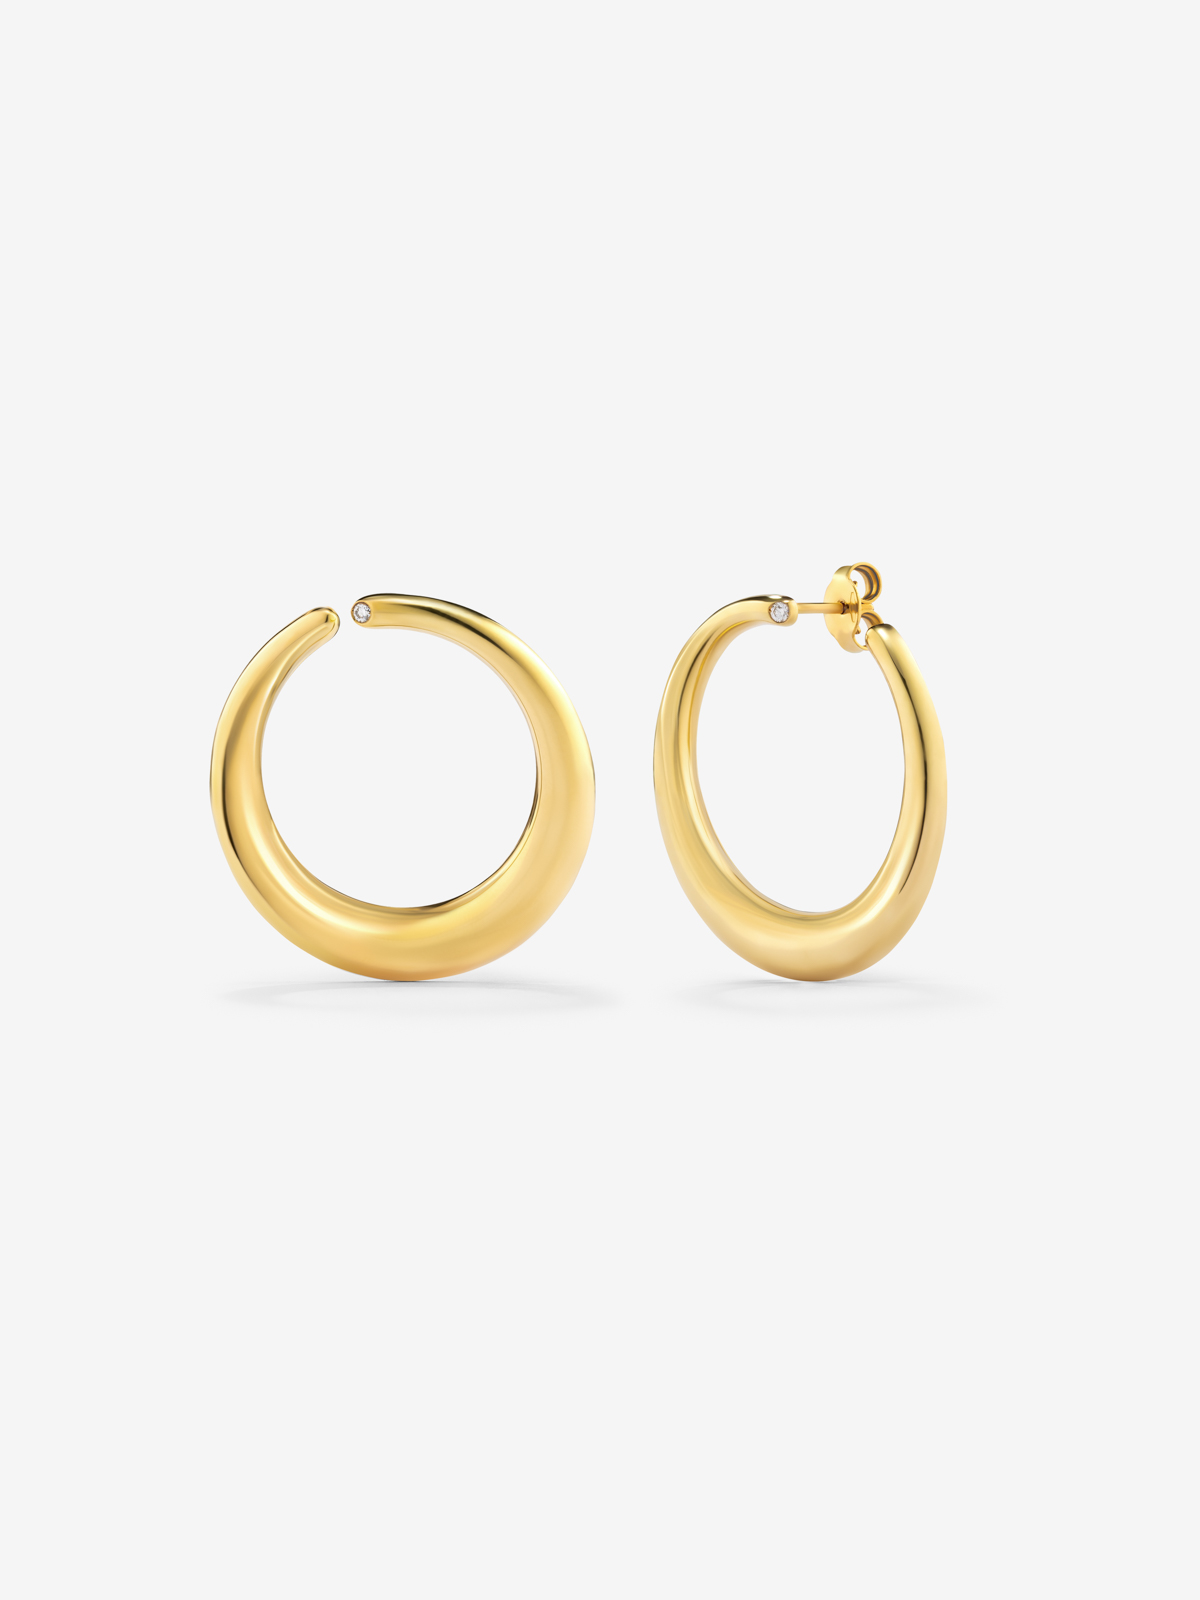 Extrao Big Smooth Earrings 18k yellow gold with diamond